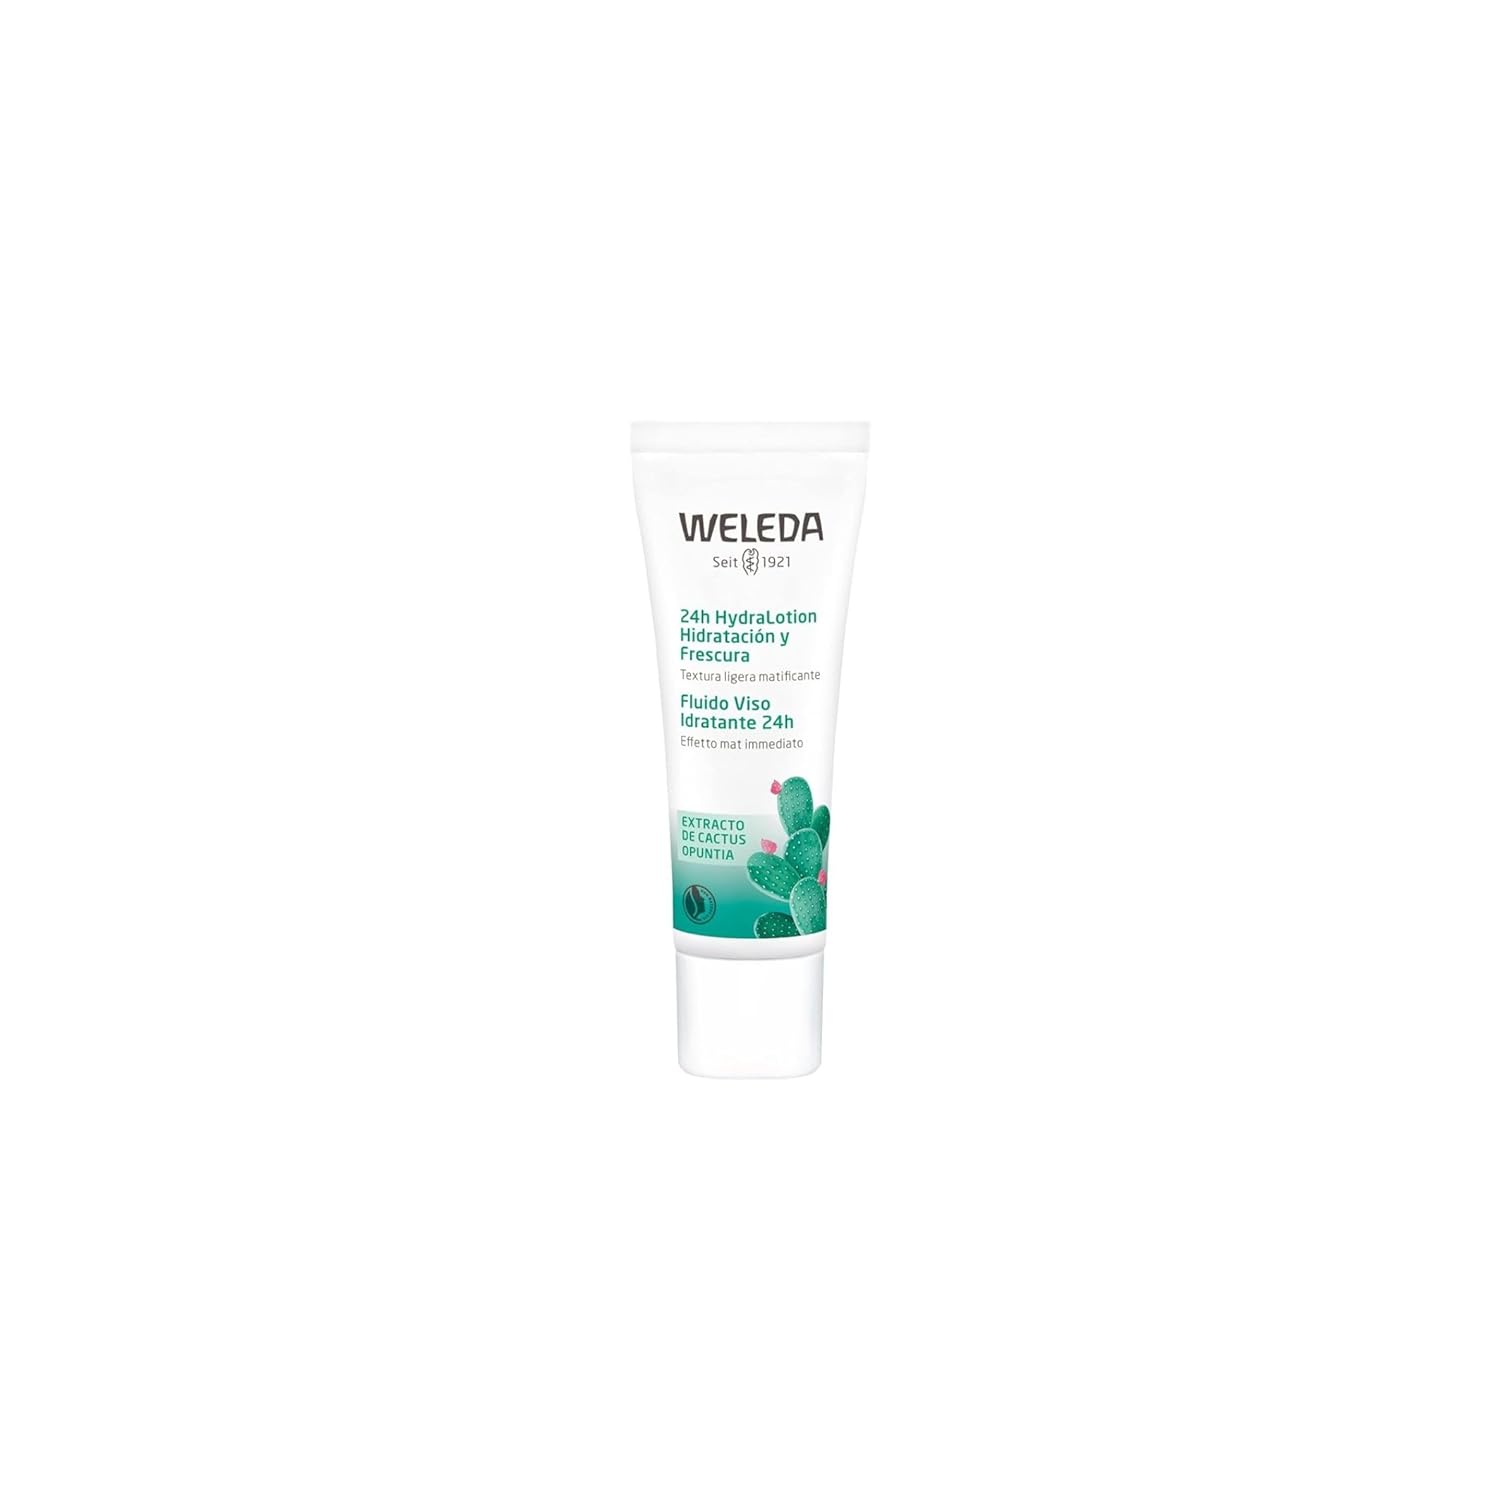 Weleda Sheer Hydration Daily Dew Face Lotion, 1 Fluid Ounce, Plant Rich Moisturizer with Prickly Pear Cactus Extract and Aloe Vera